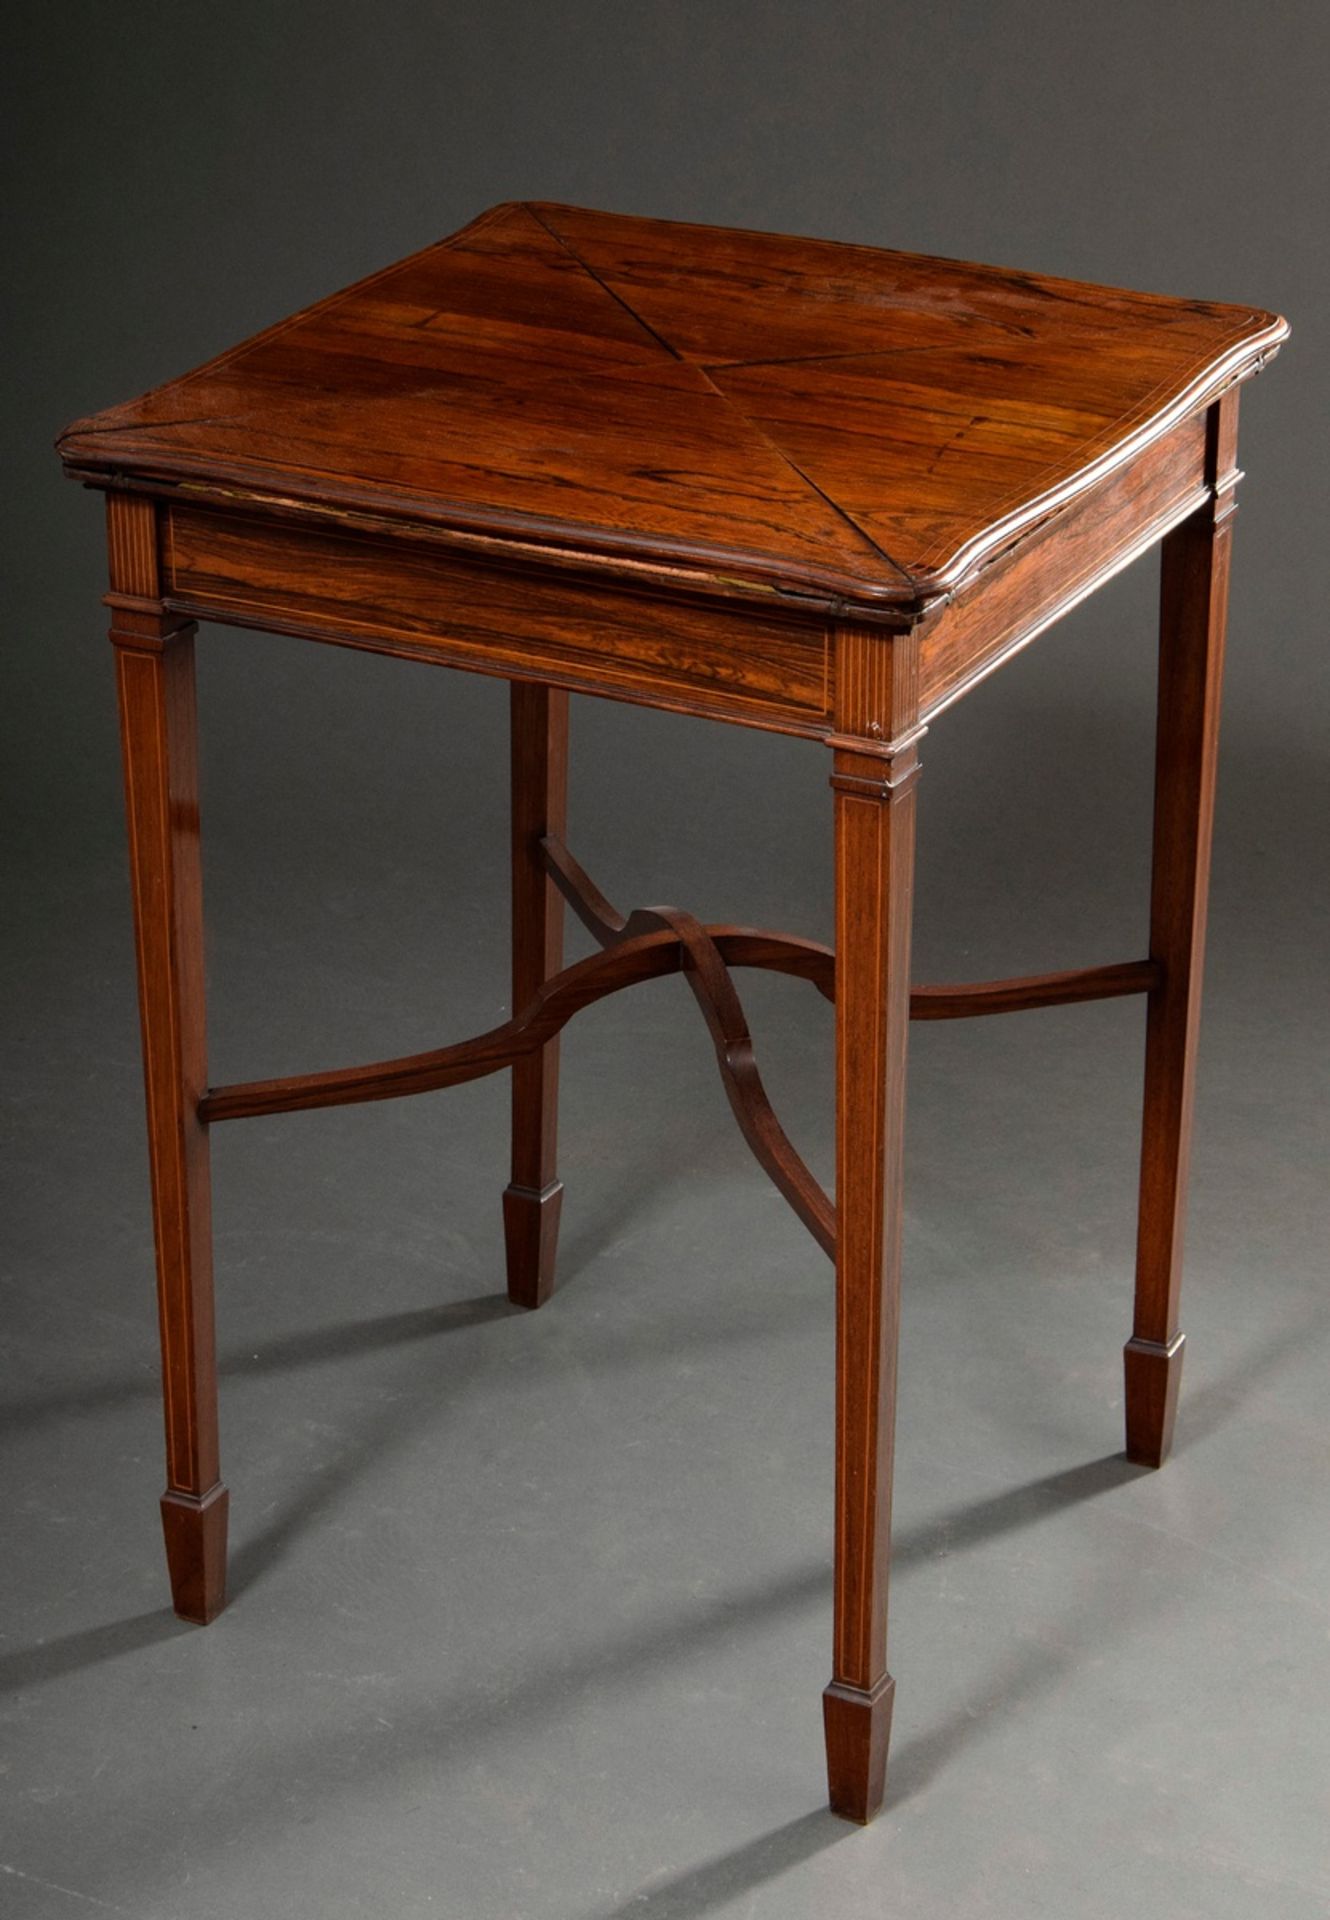 Victorian bridge table with four folding tops and felt cover, mahogany with fine ribbon inlays, Eng